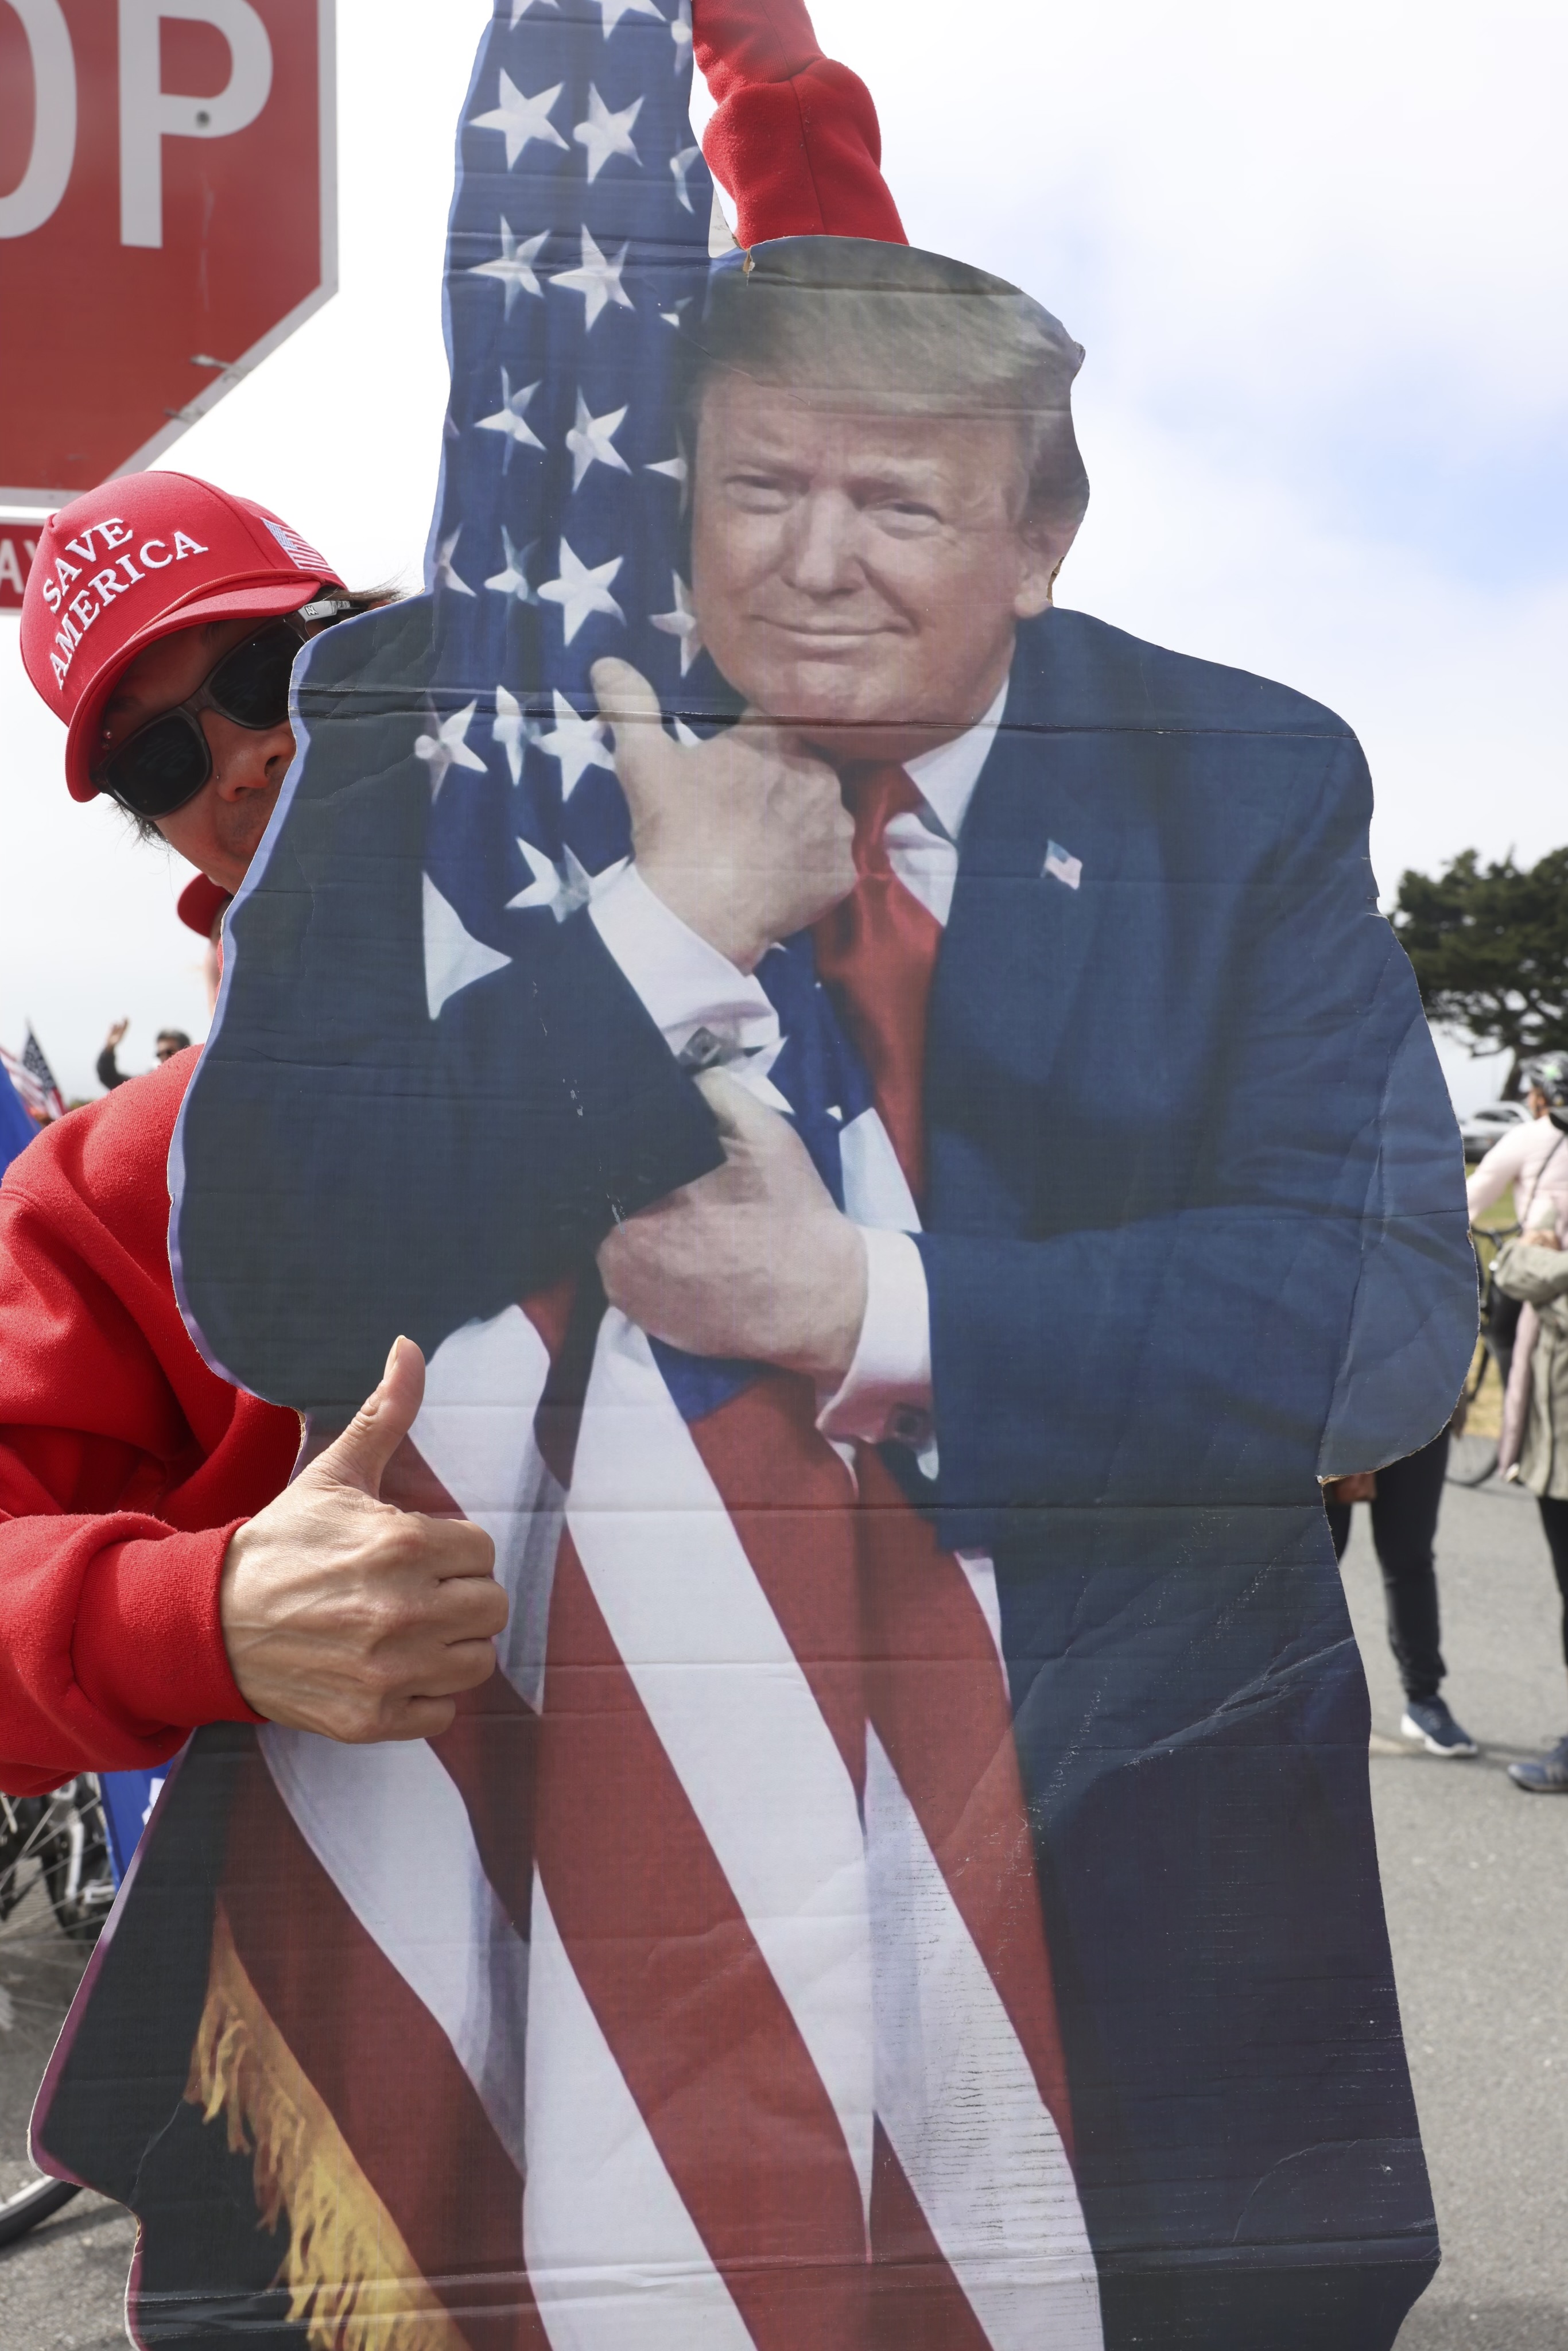 A person in a red &quot;Save America&quot; hat and sunglasses is holding a large cutout of a man hugging an American flag. They show a thumbs-up sign next to a stop sign.